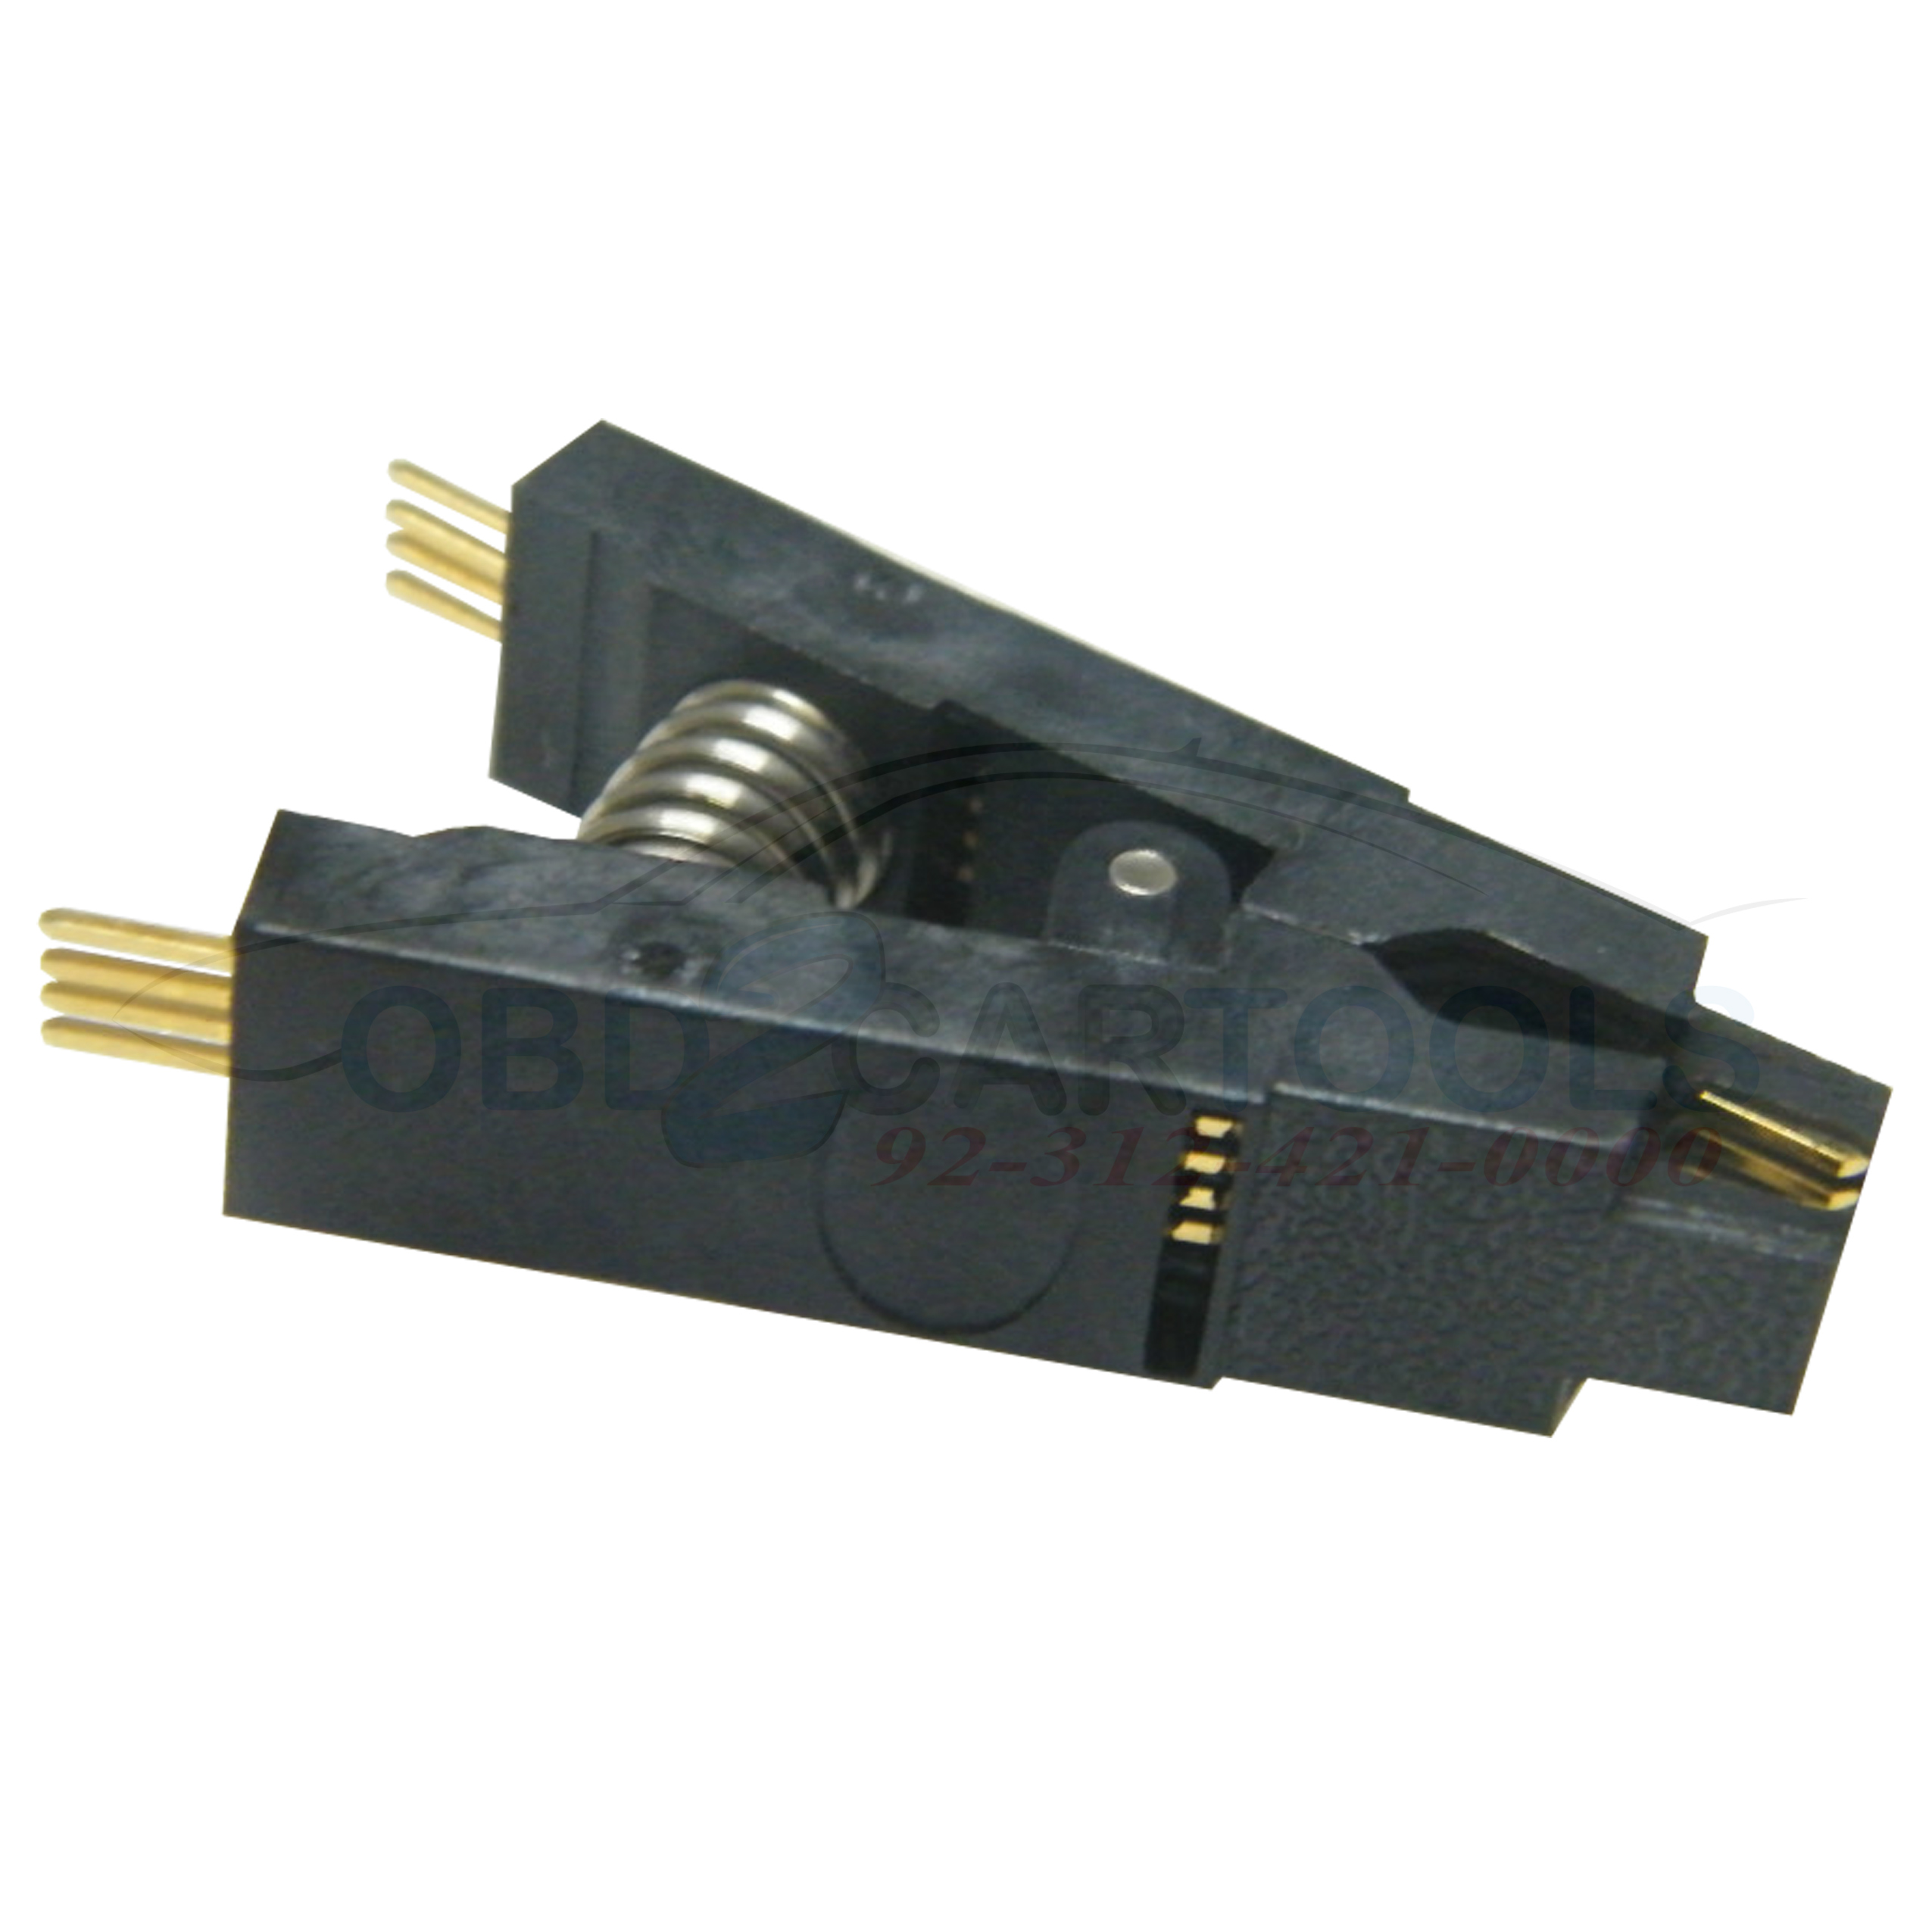 Product image for IC PROGRAMING CLIP WITHOUT WIRE Test Clip SOIC8